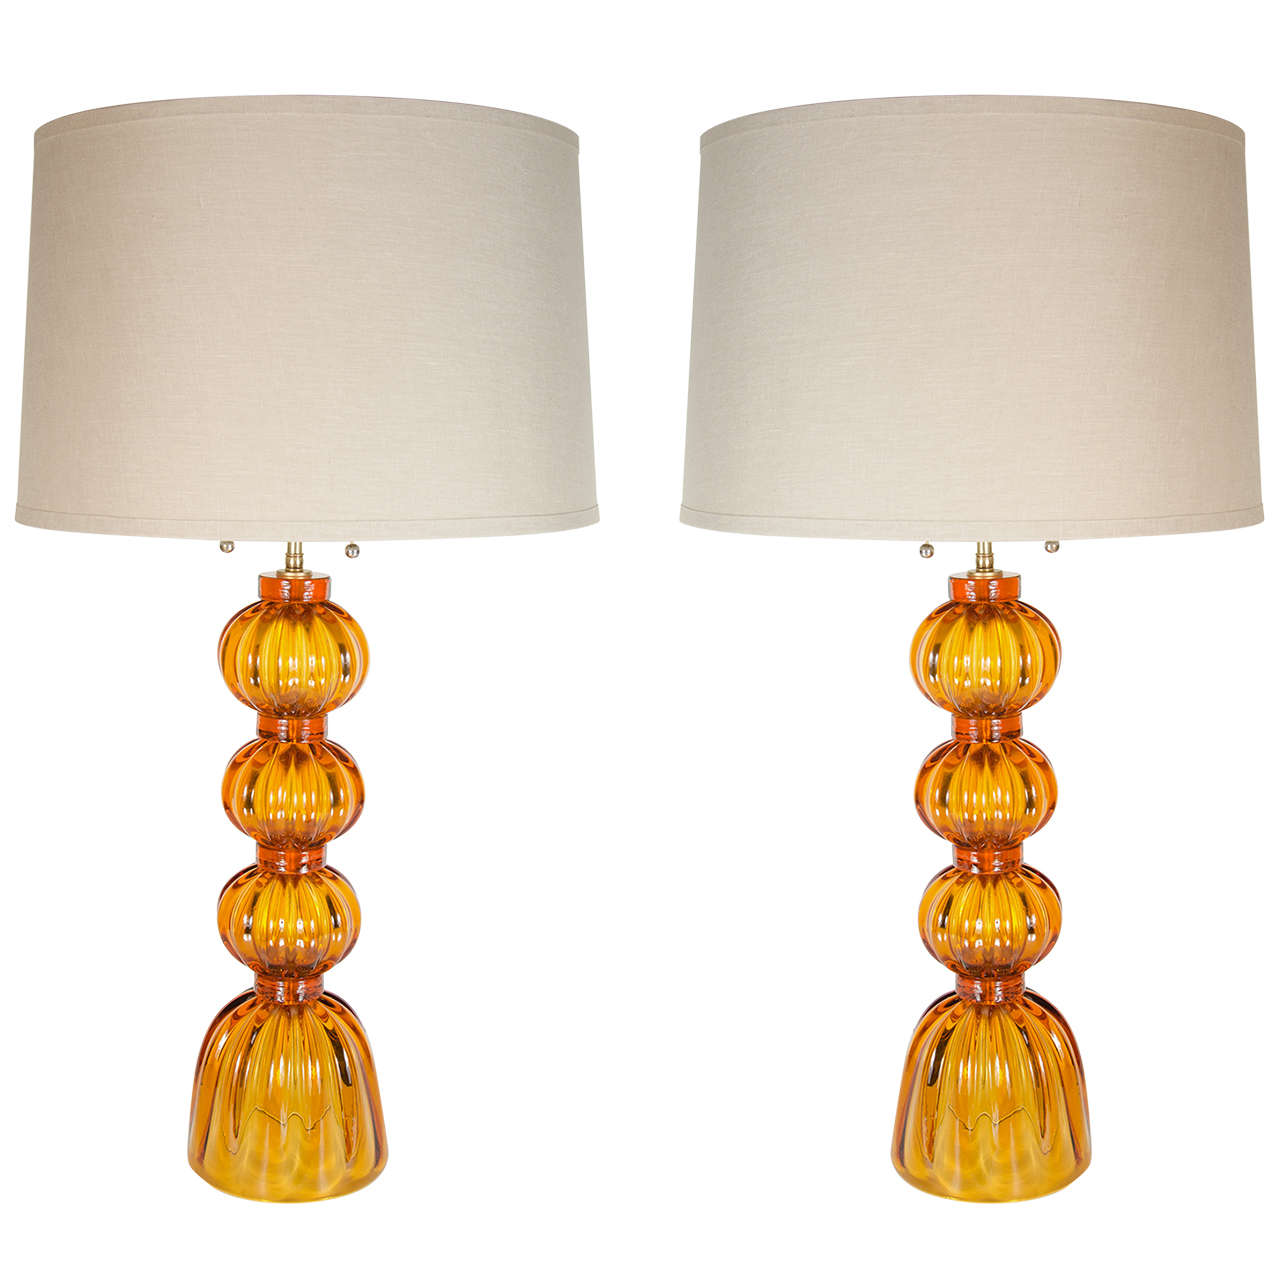 Pair of Mid-Century Modernist Hand Blown Table Lamps signed Toso Murano